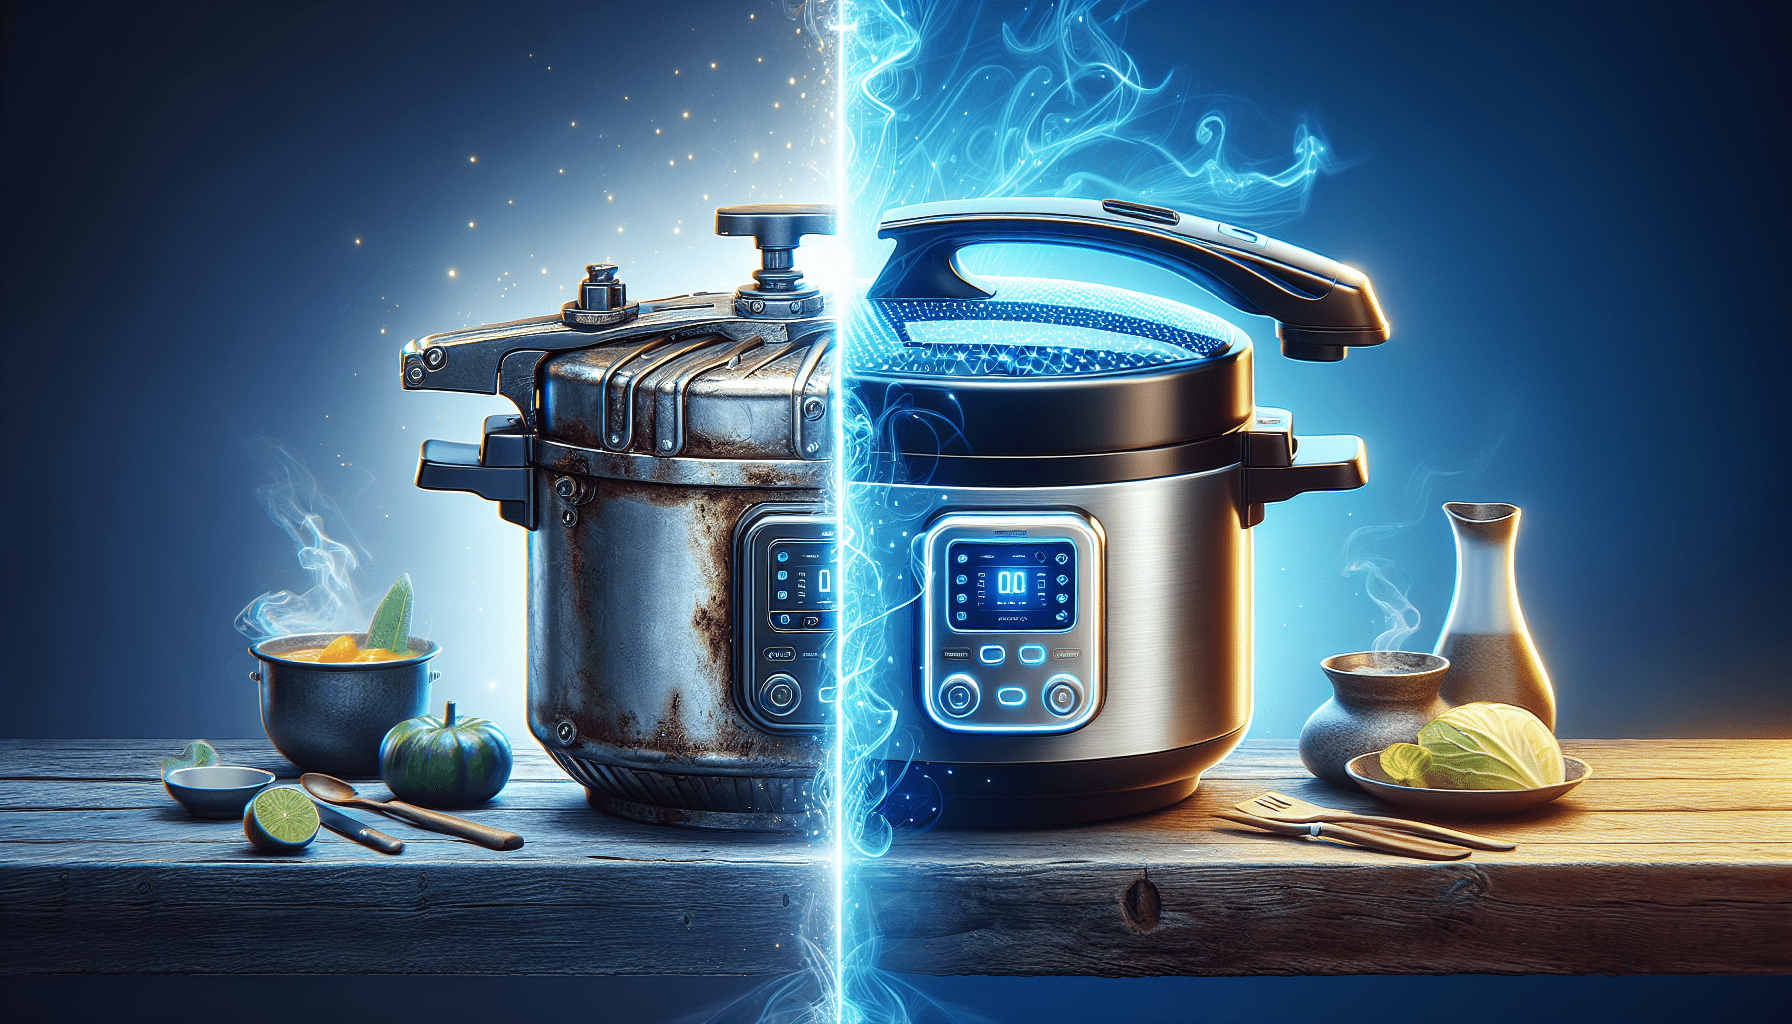 What Are The Differences Between Traditional And Modern Pressure Cookers?